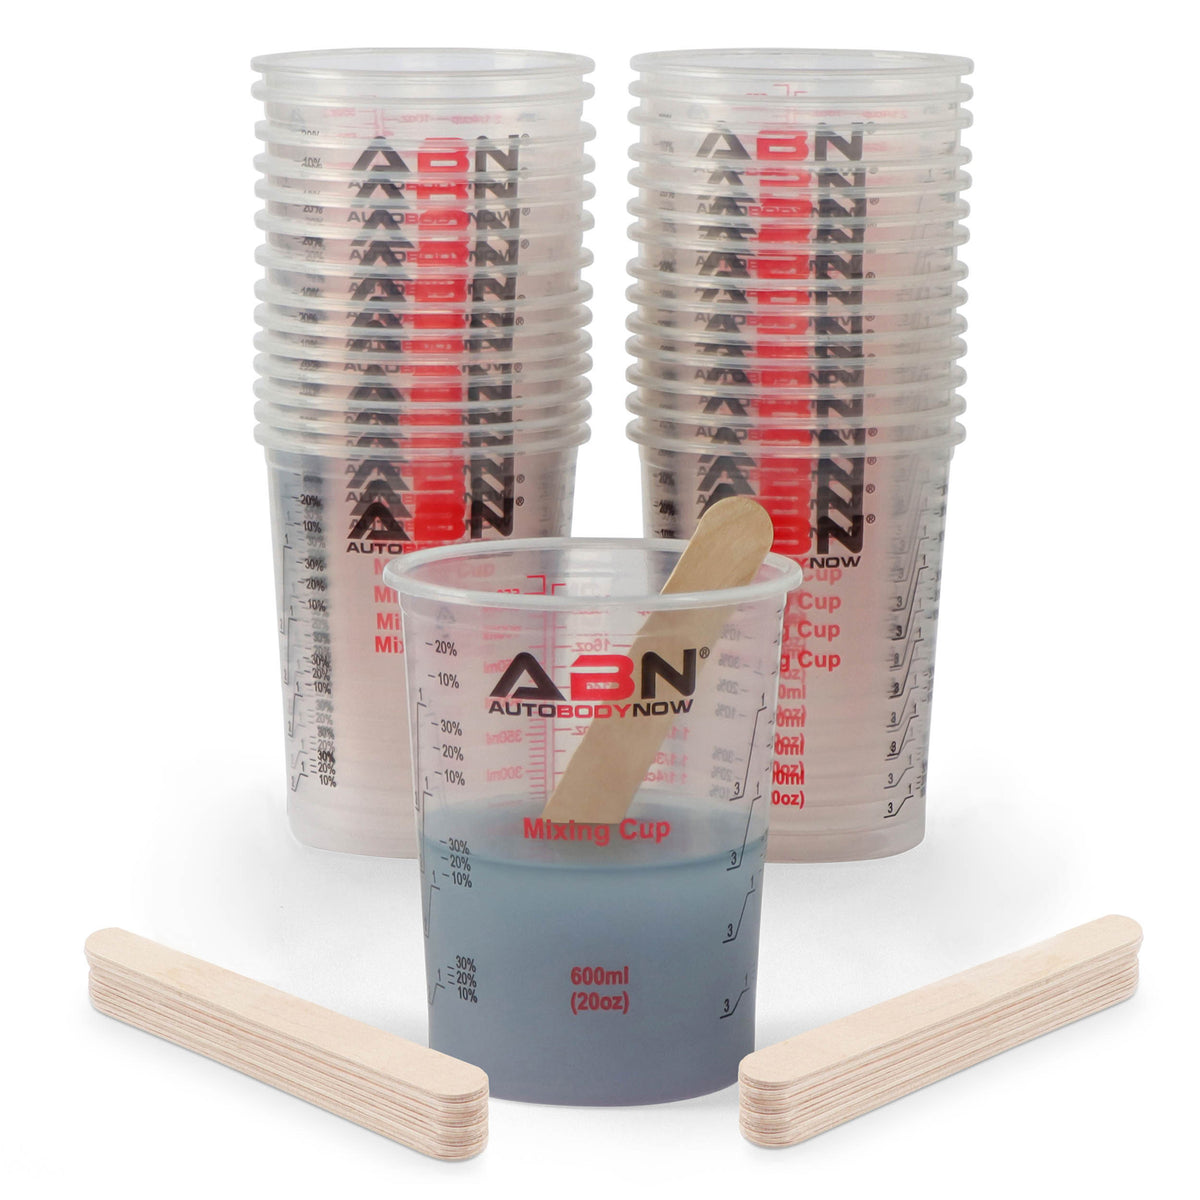 Automotive Paint Mixing Cups - 50pc 20oz Epoxy Mixing Cups and Sticks